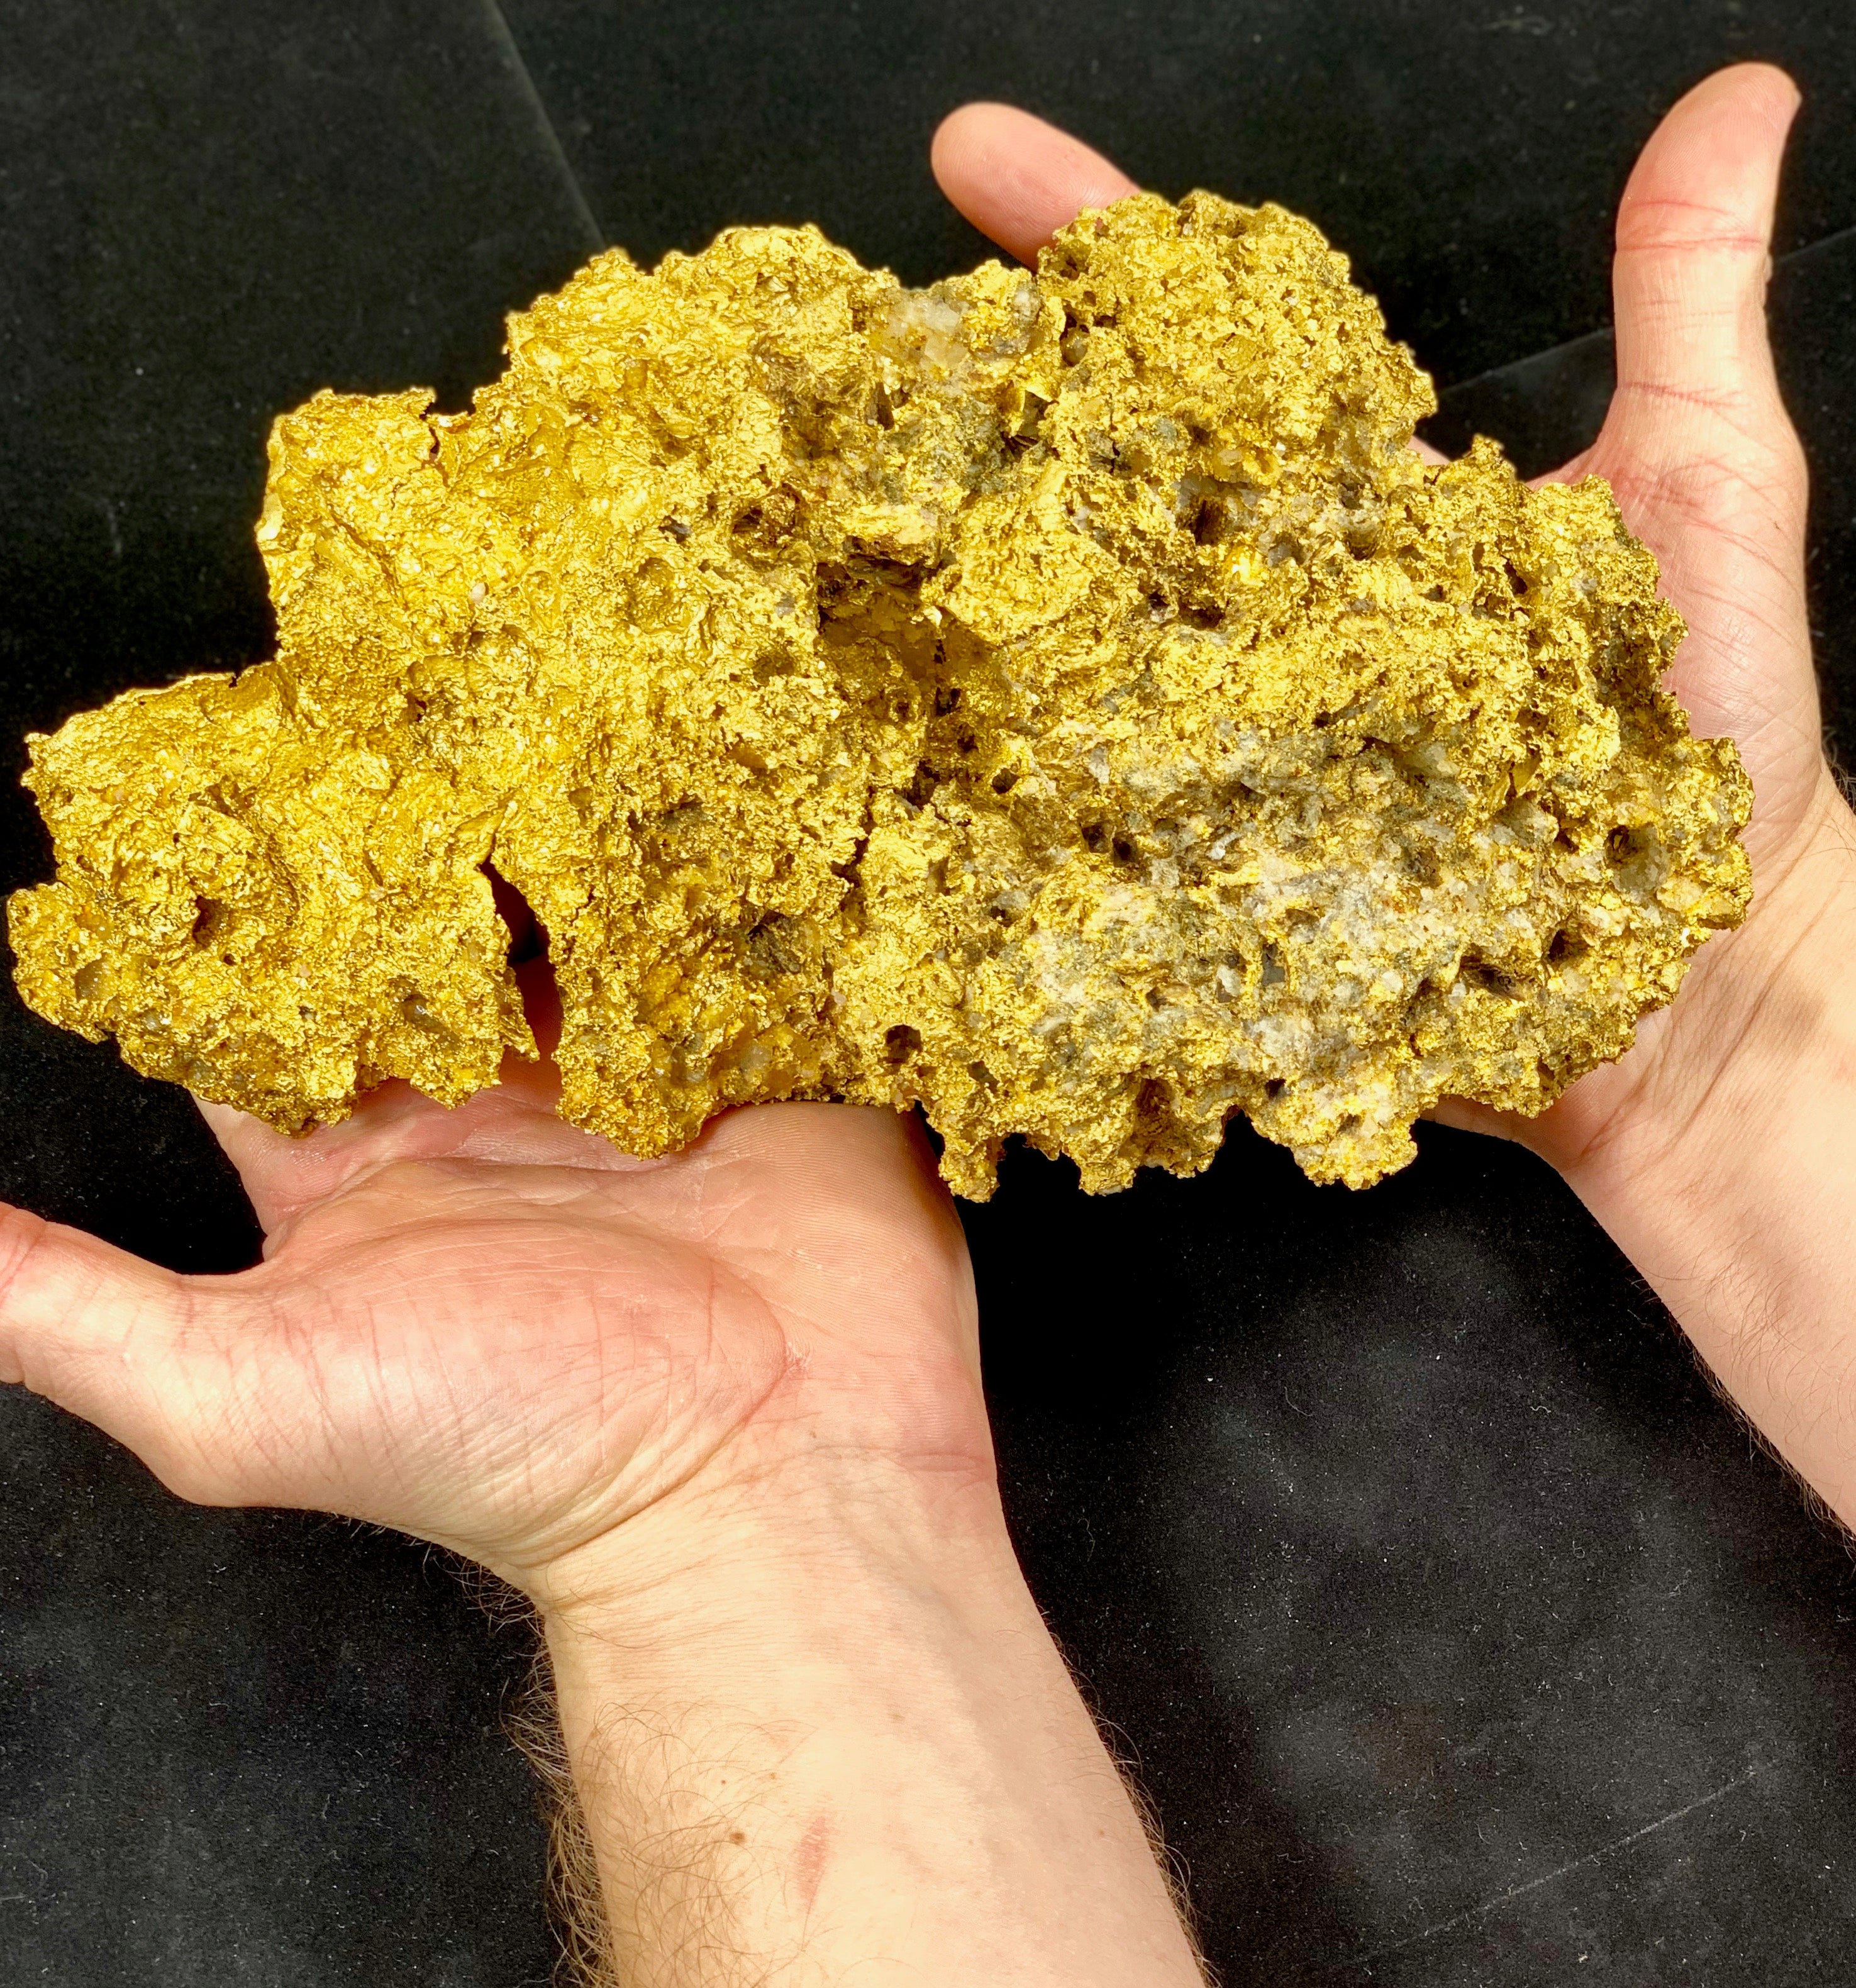 Large Natural Gold Nugget Australian 3,679.2 Grams 118.30 Troy Ounces"Hello There"